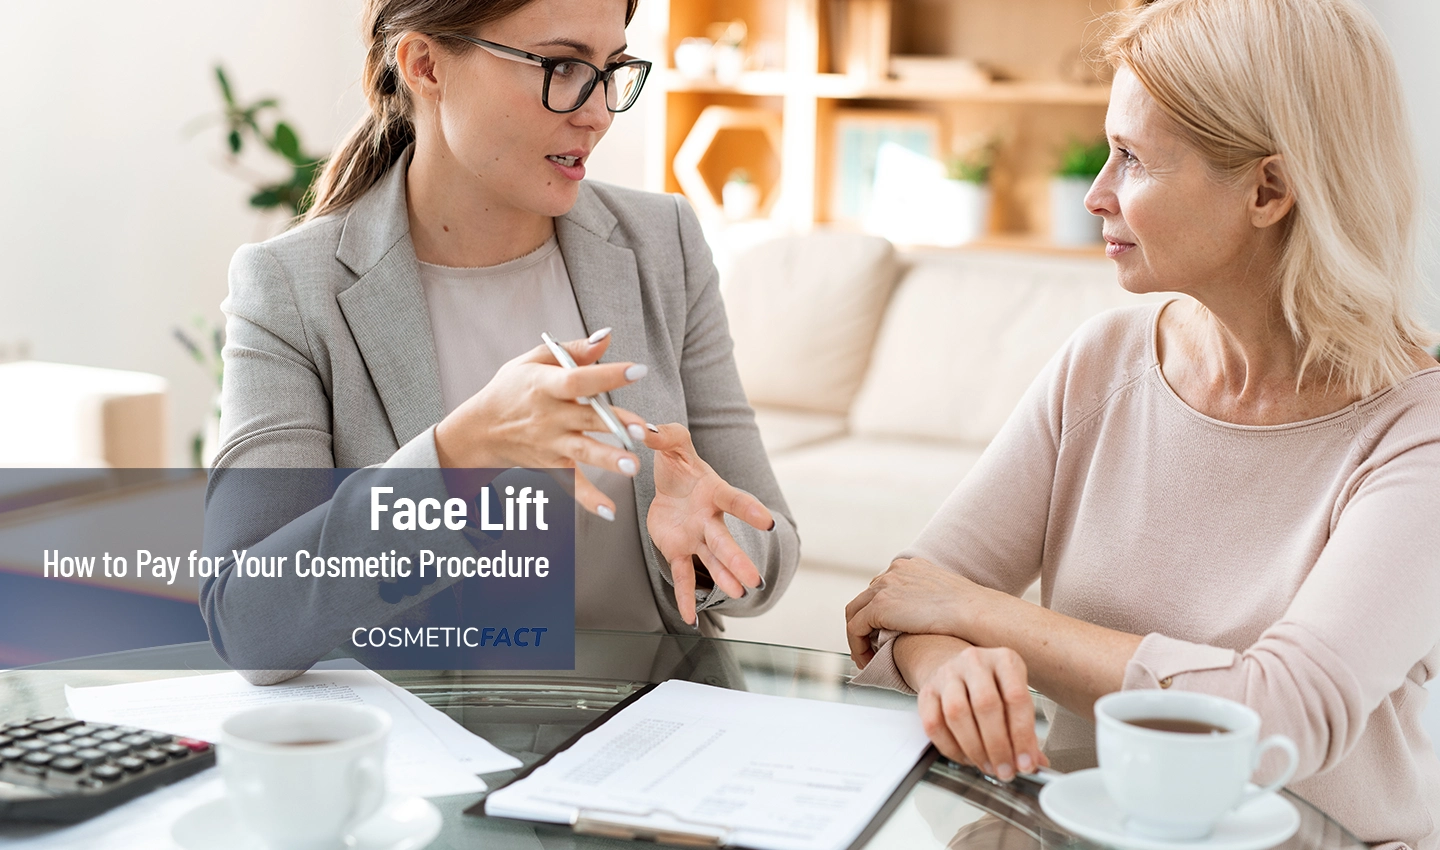 Woman visiting a surgeon for facelift surgery financing, discussing payment options for cosmetic procedures